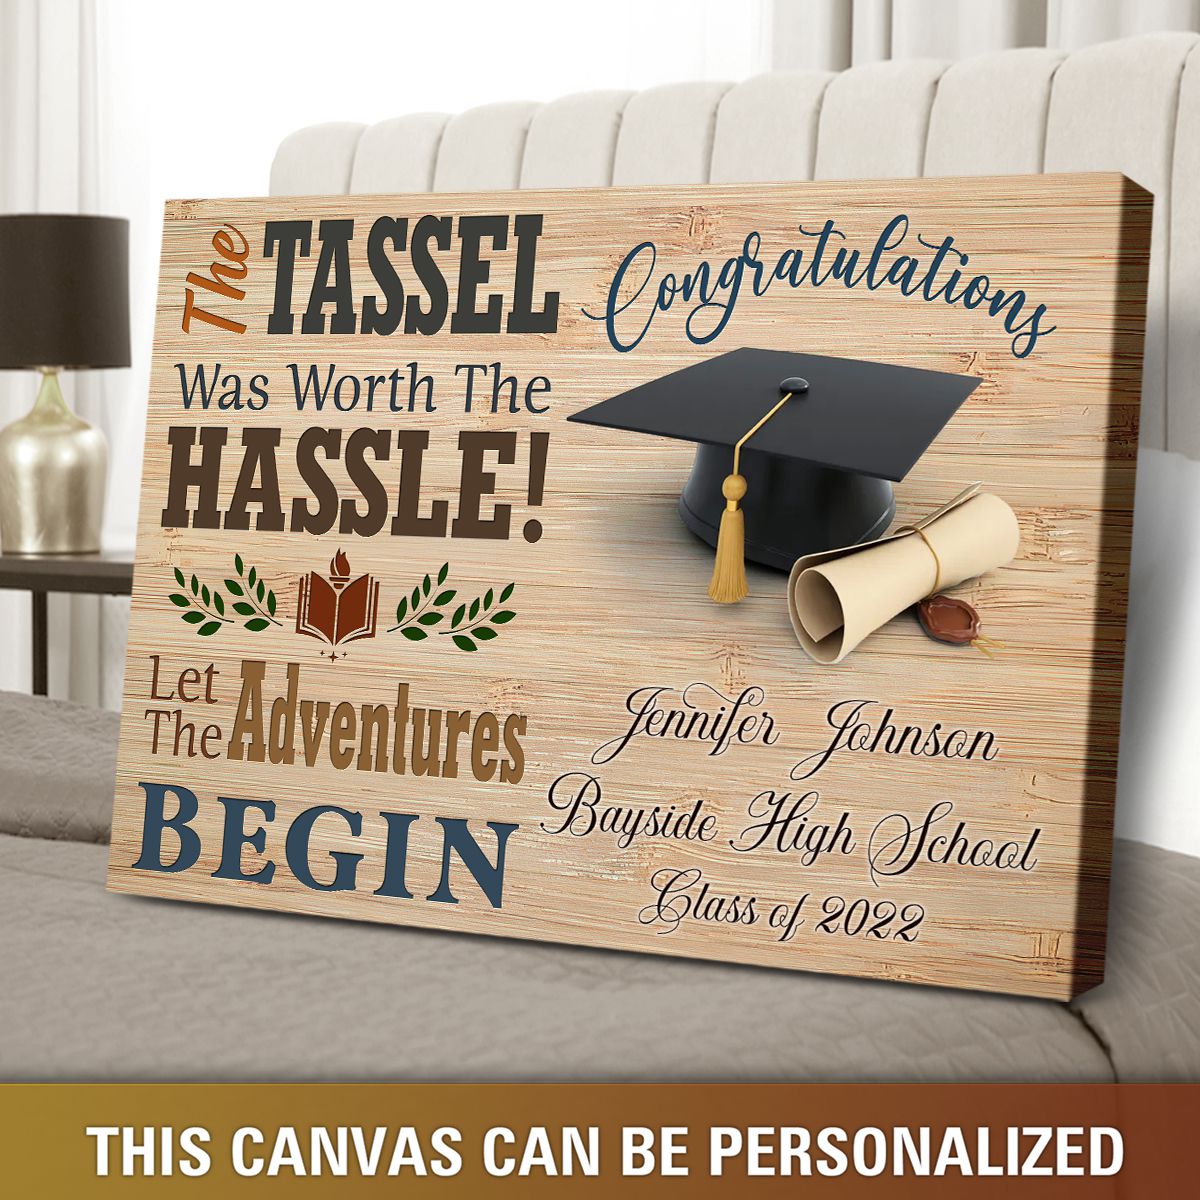 https://images.ohcanvas.com/ohcanvas_com/2022/06/12194644/graduation-gift-ideas-personalized-graduation-gifts-gift-for-a-graduate-student.jpg